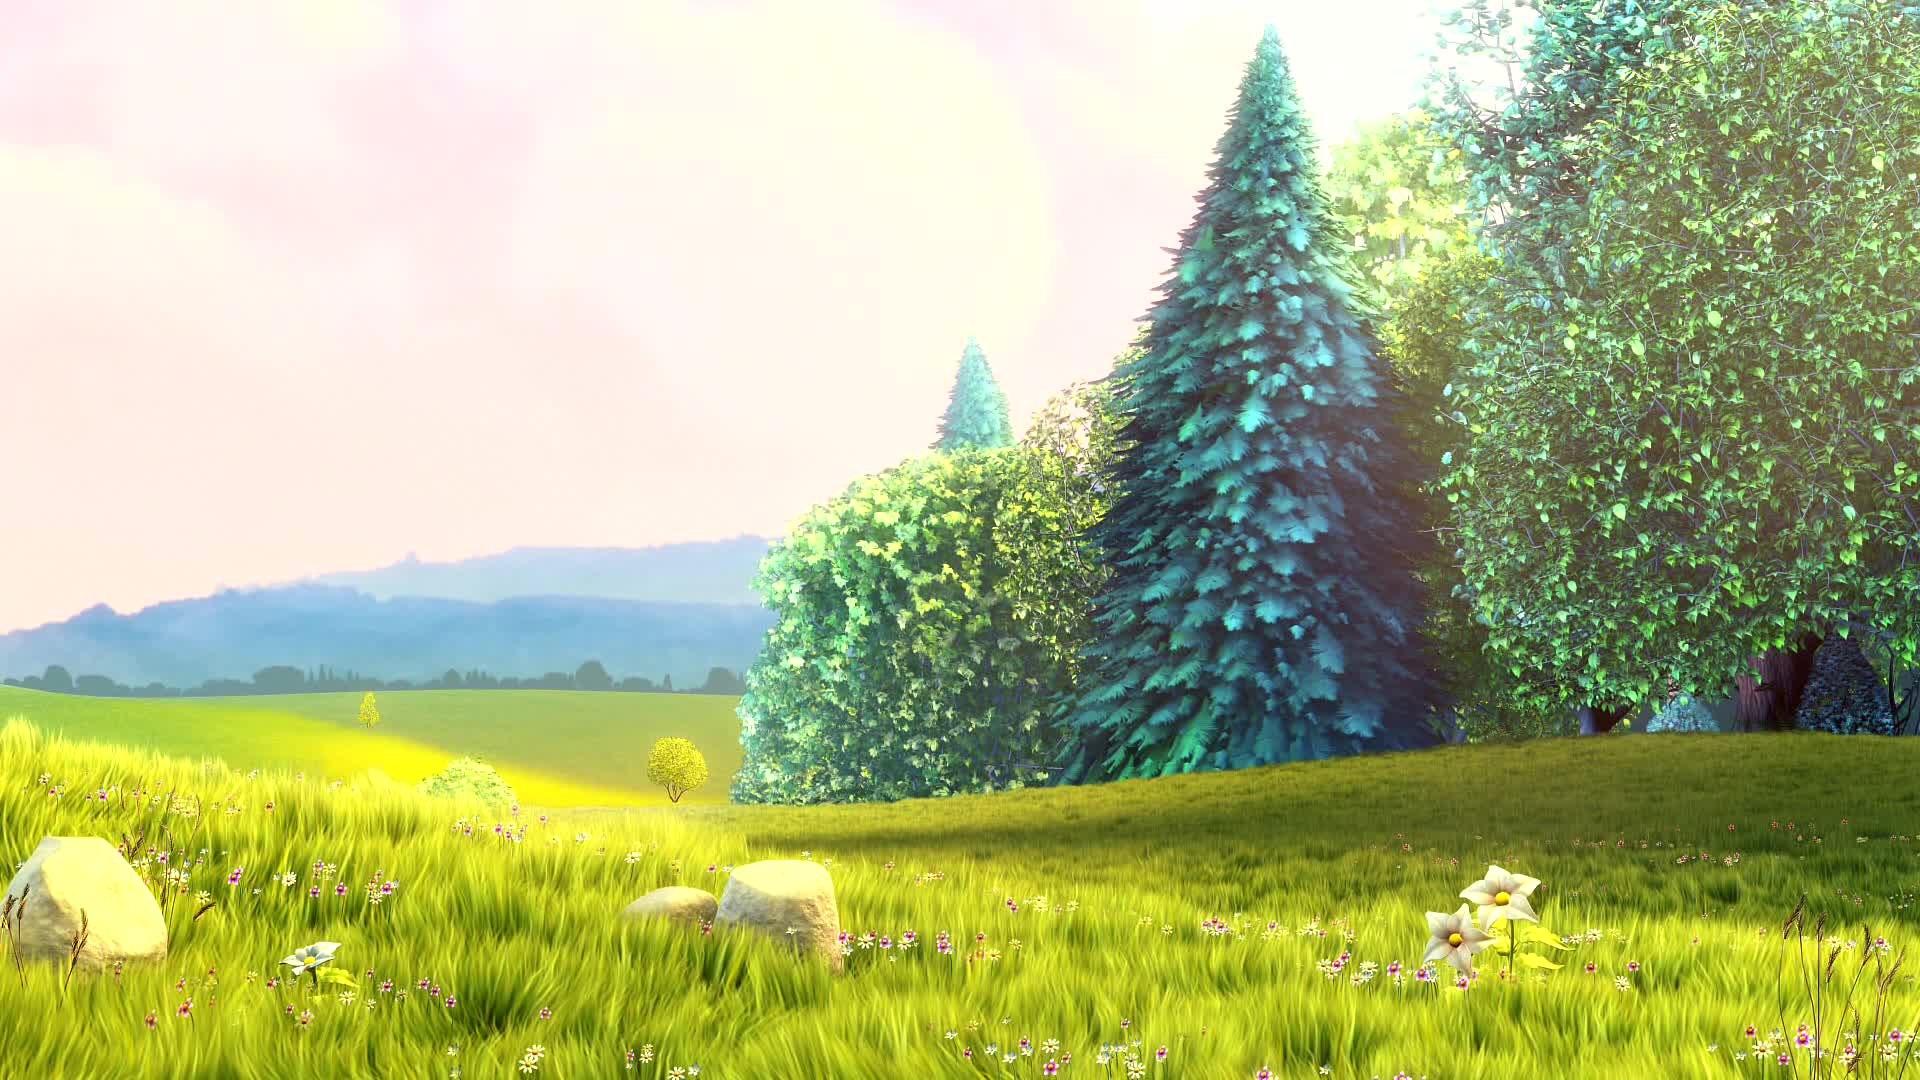 Big Buck Bunny first 23 seconds 1080p.ogv